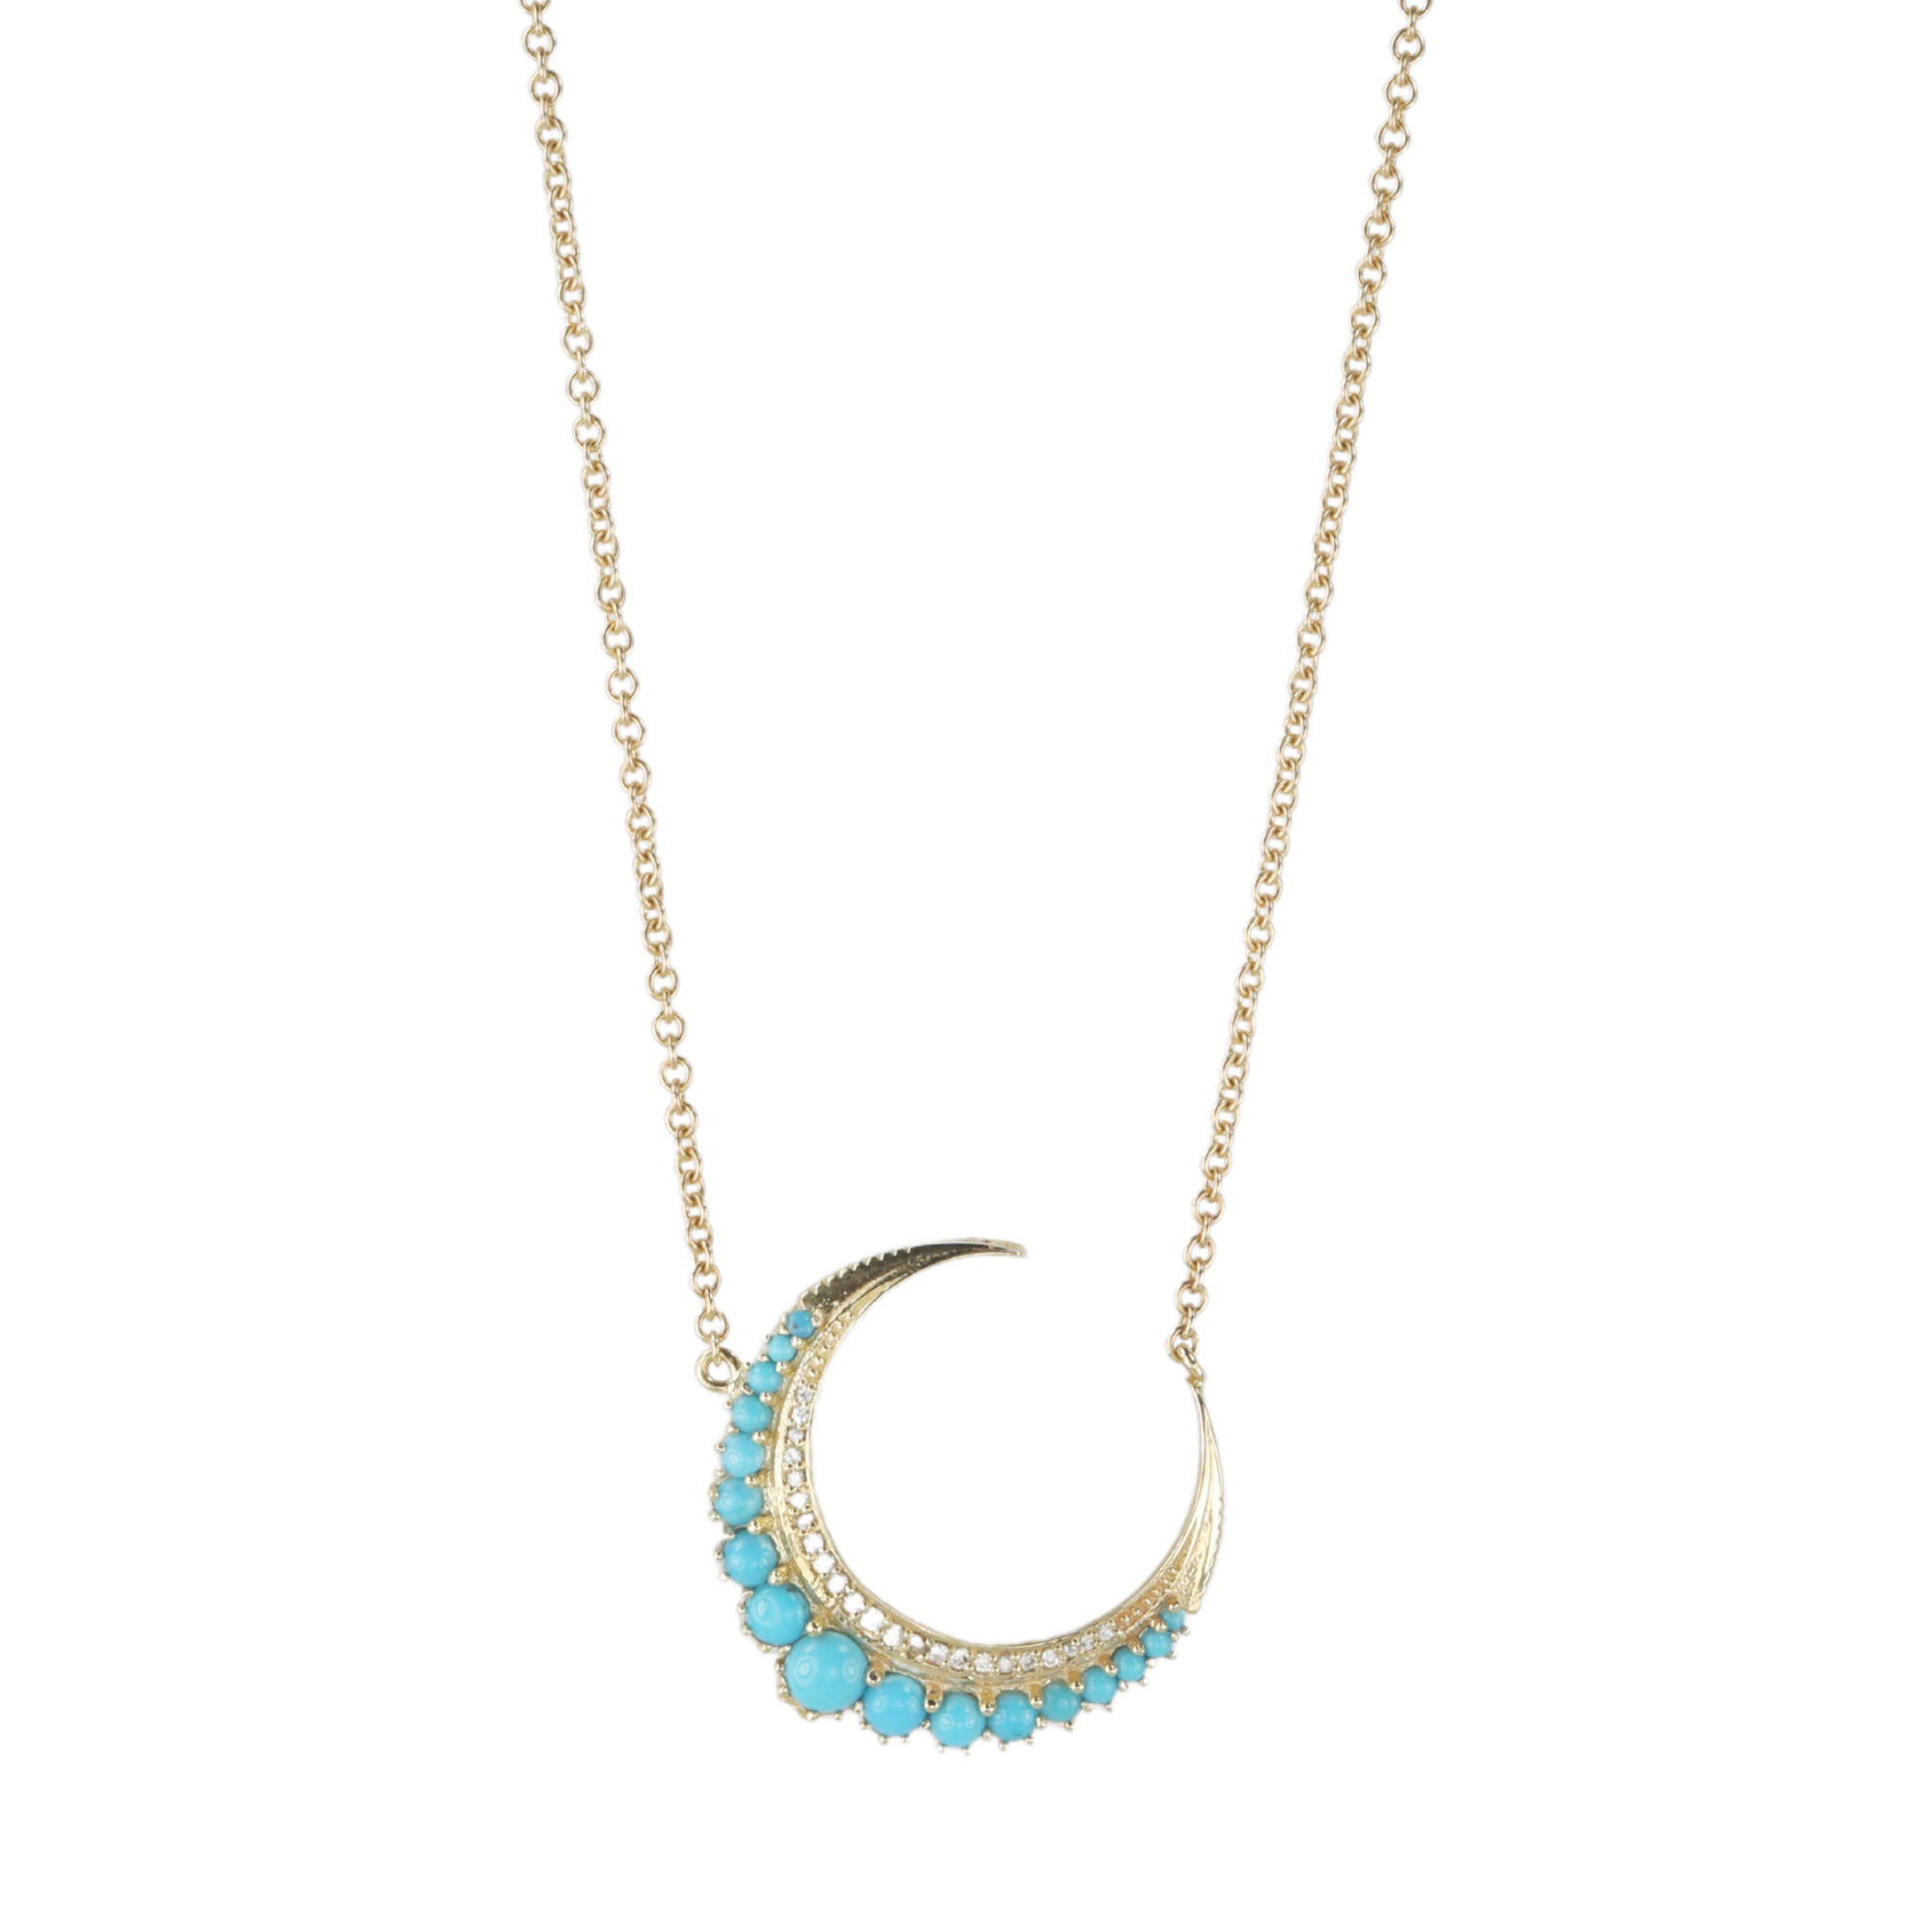 14K Crescent Moon Necklace with Turquoise and Diamonds - Peridot Fine Jewelry - Jacquie Aiche